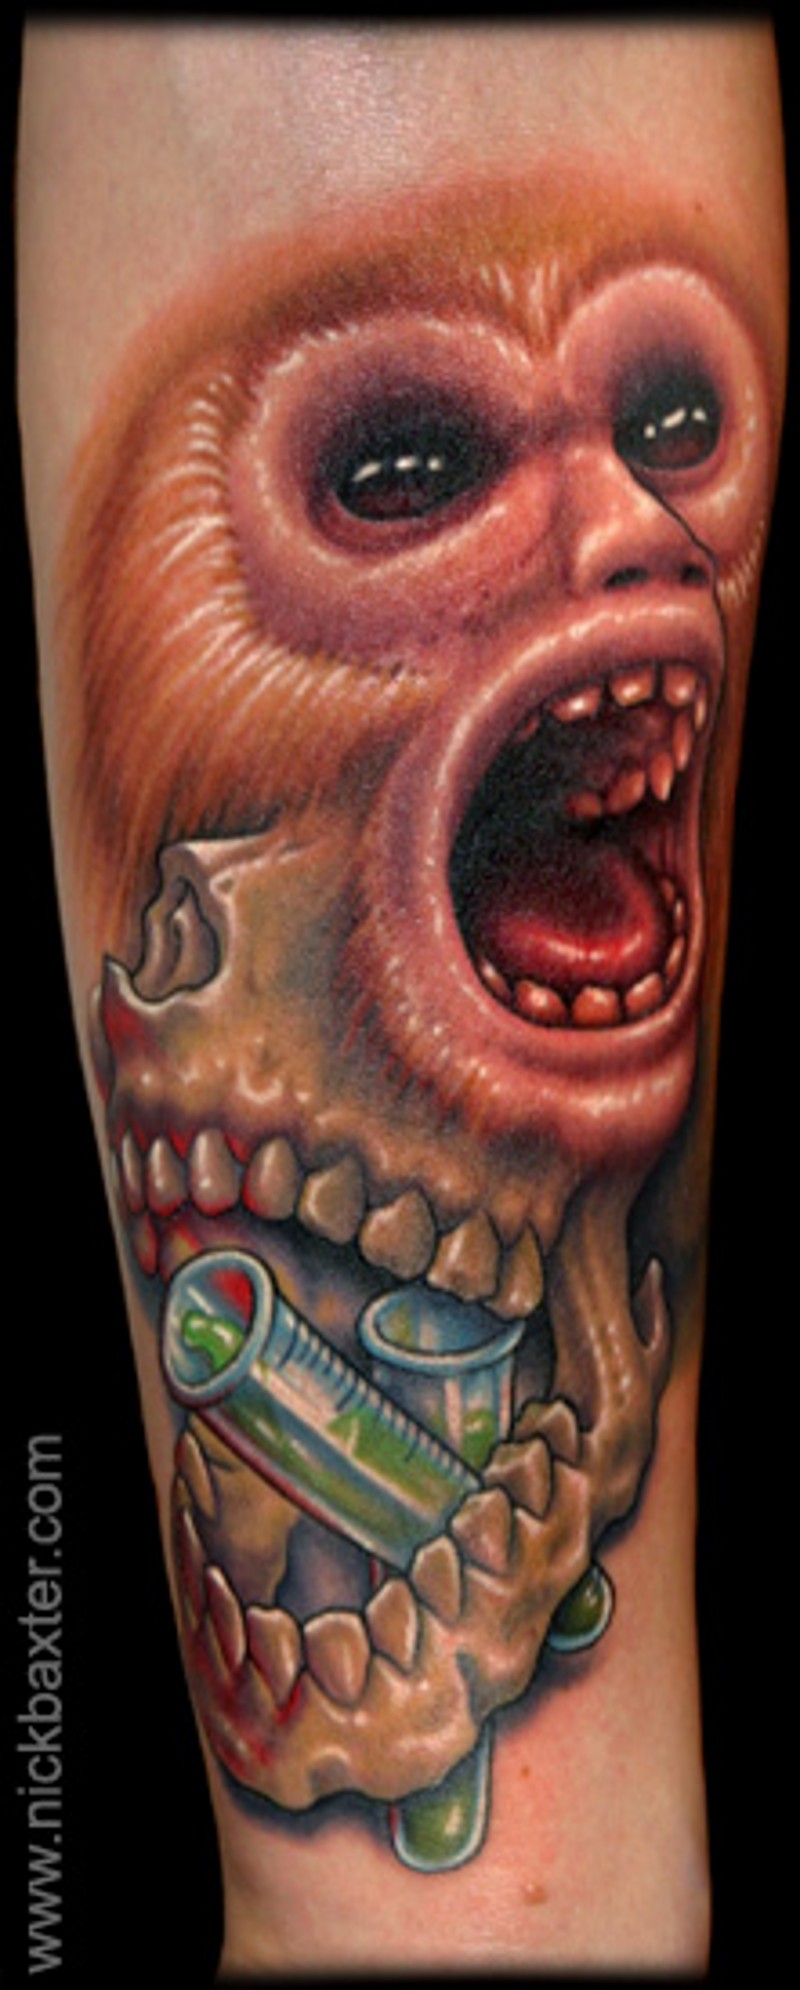 Unusual combined alive monkey face tattoo on forearm combined with skull and tubes